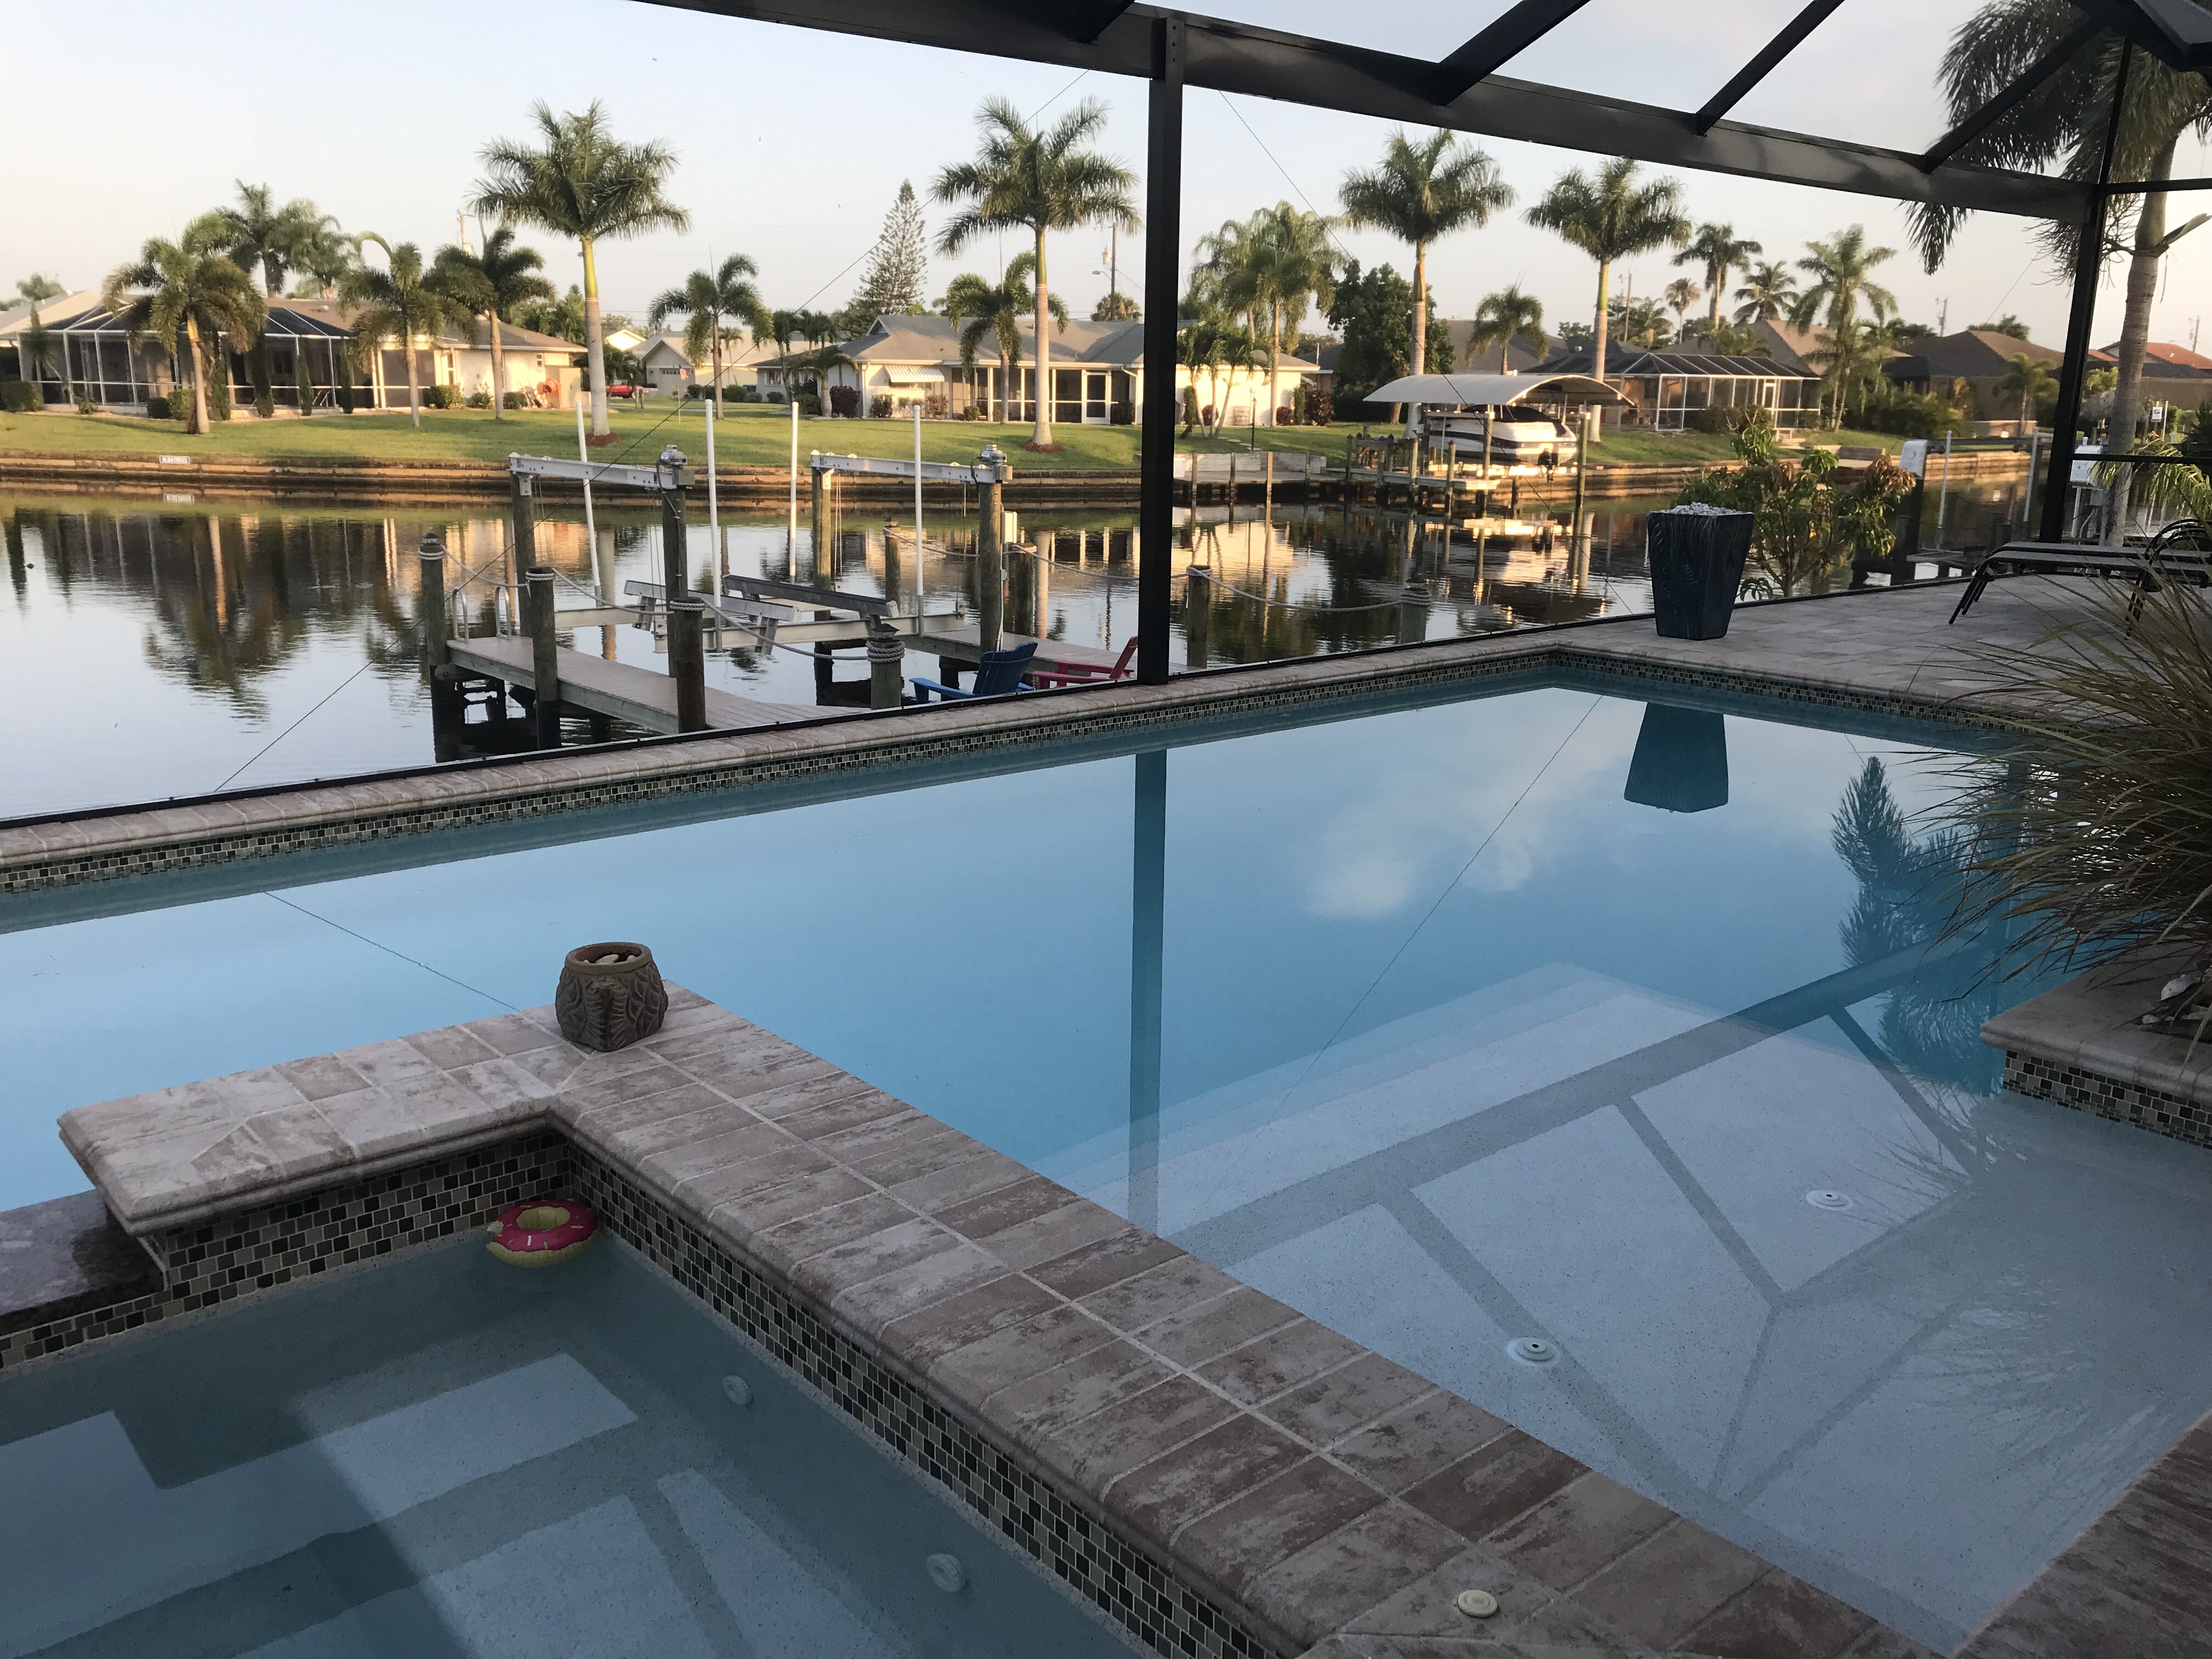 Inviting poolside backyard area of a beautiful Cape Coral, FL house, representing the competitive Florida real estate market and the advantages of learning with Cooke Real Estate School to adapt to higher mortgage rates.